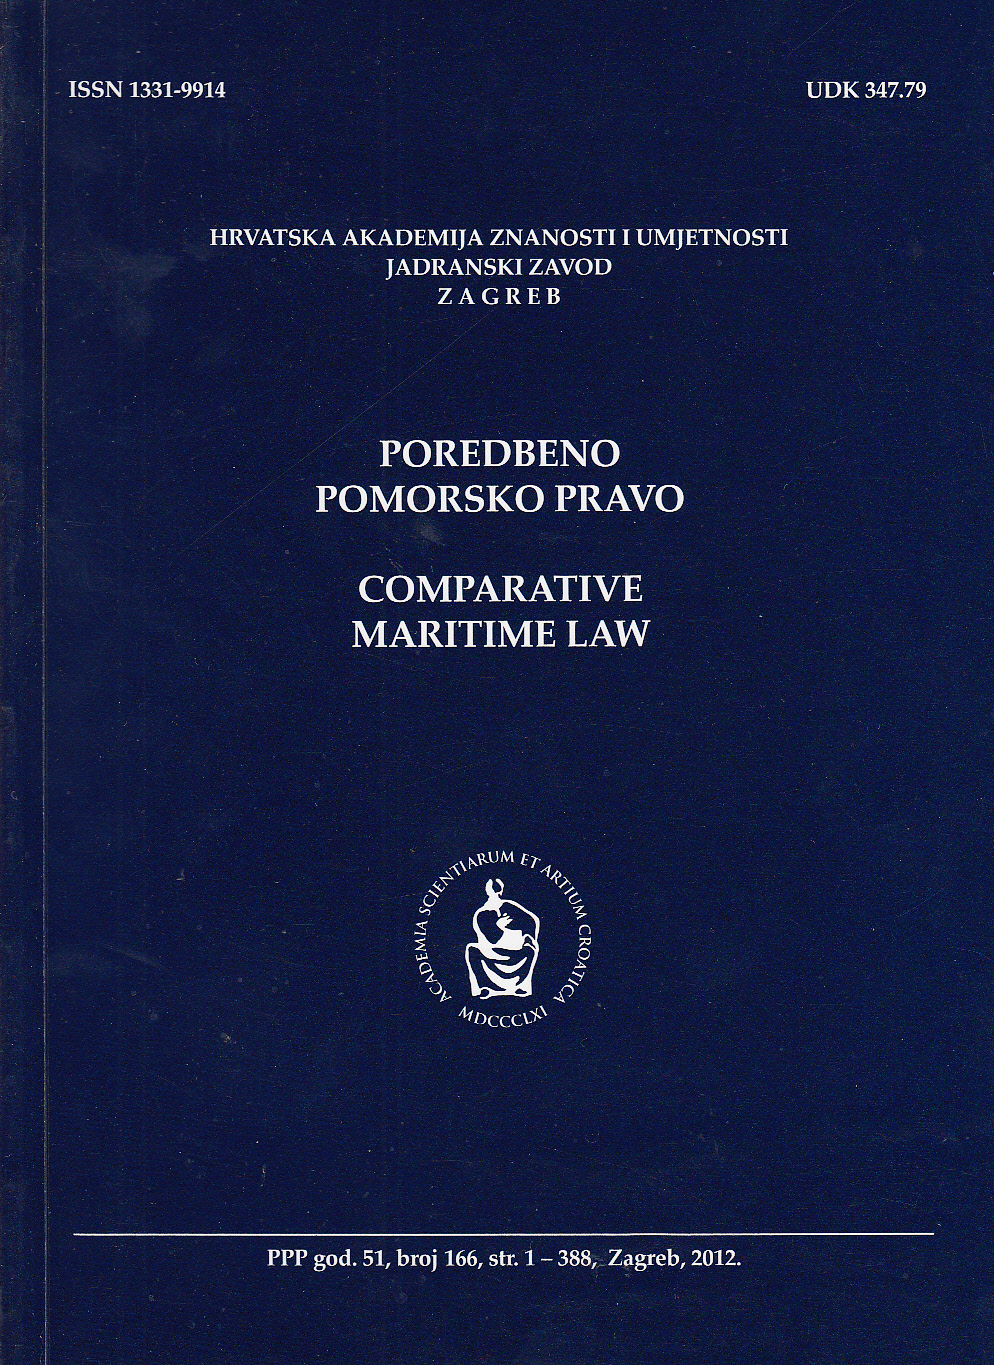 Financing of sea ports in the light of the adoption of the European Union Directive on the Award of Concession Contracts Cover Image